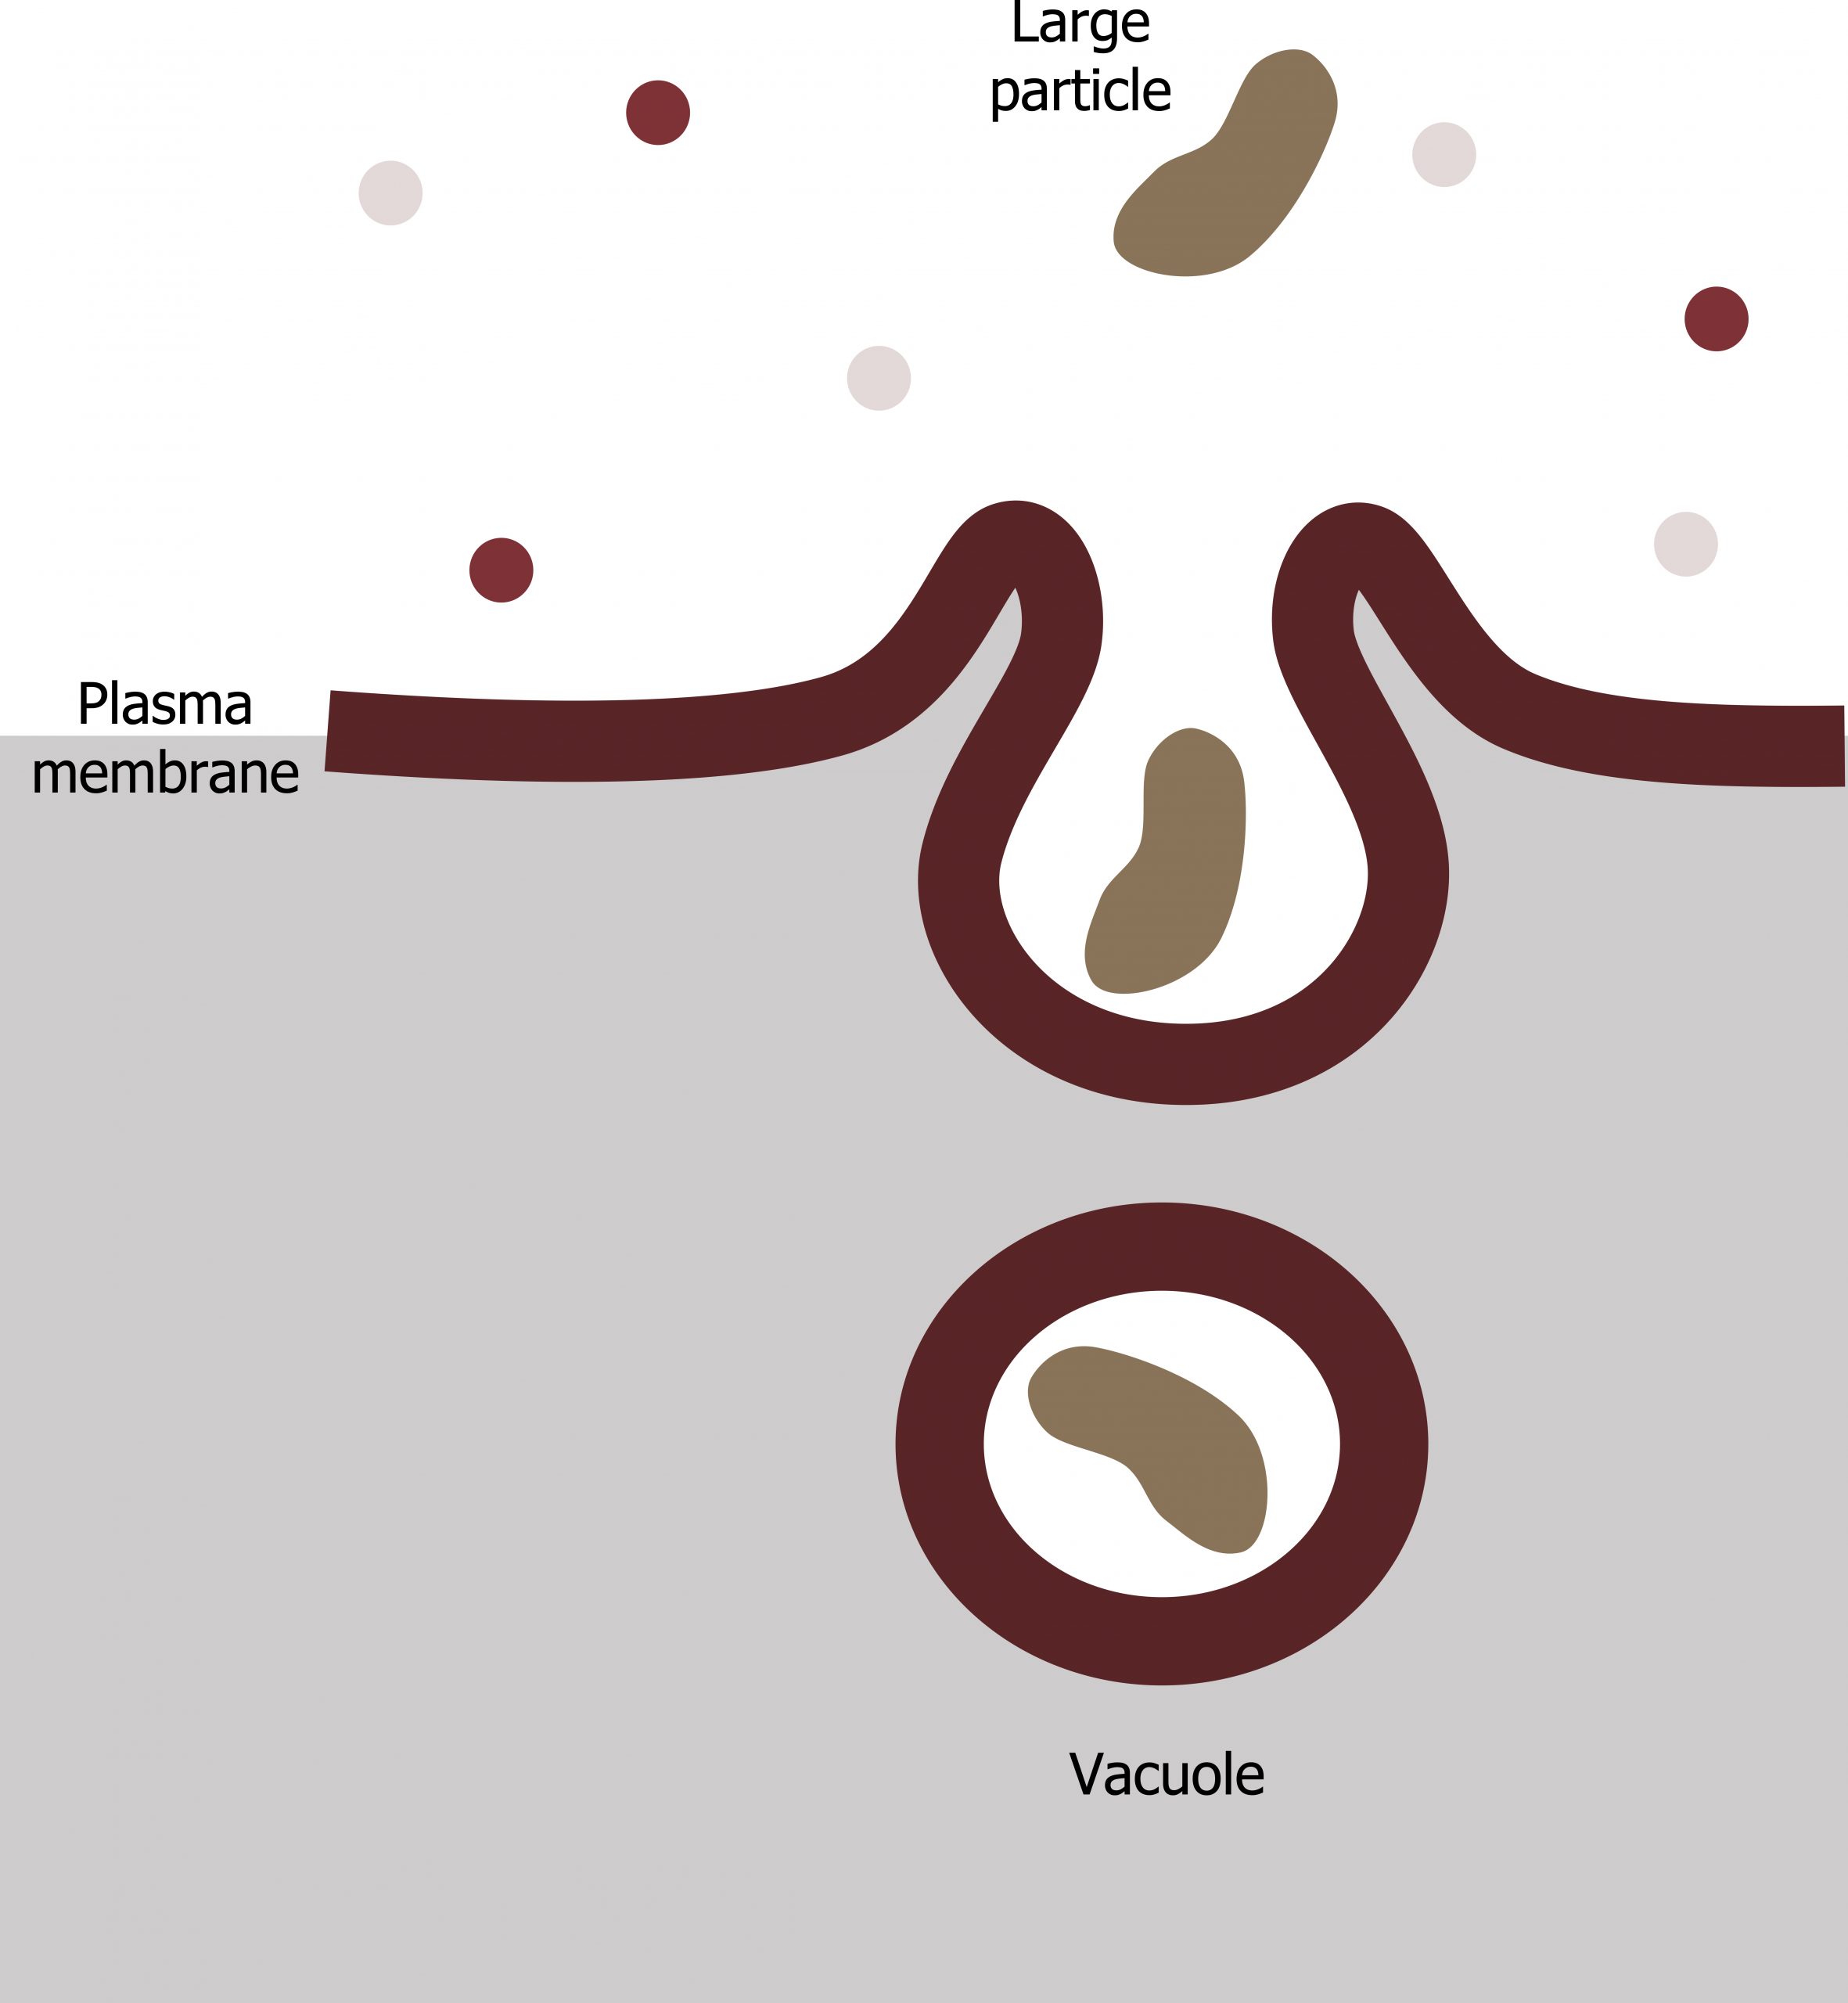 A large particle becomes engulfed by the plasma membrane and is then transported into the cell in a vacuole.